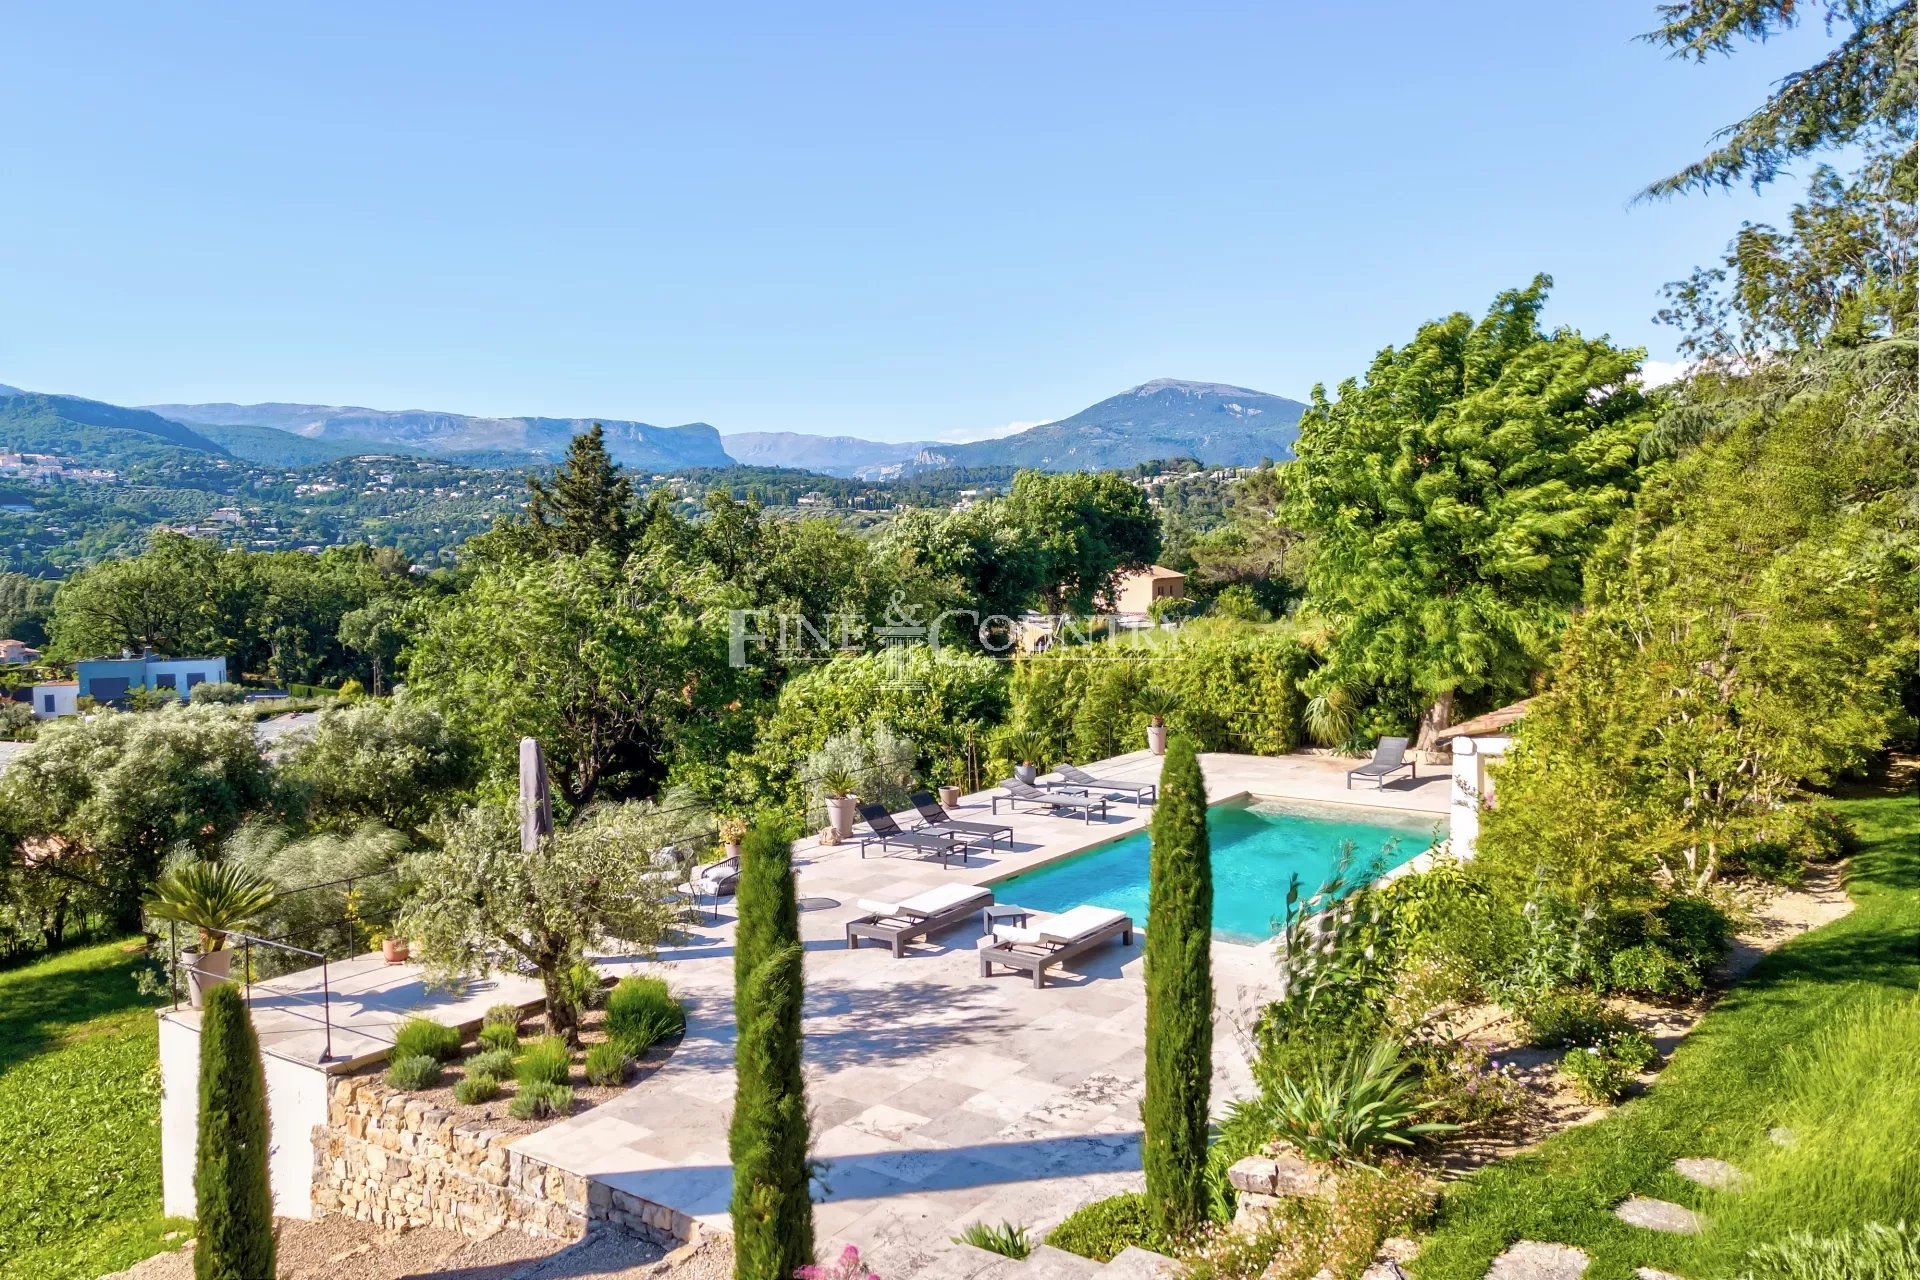 Villa for sale close to Valbonne with panoramic views